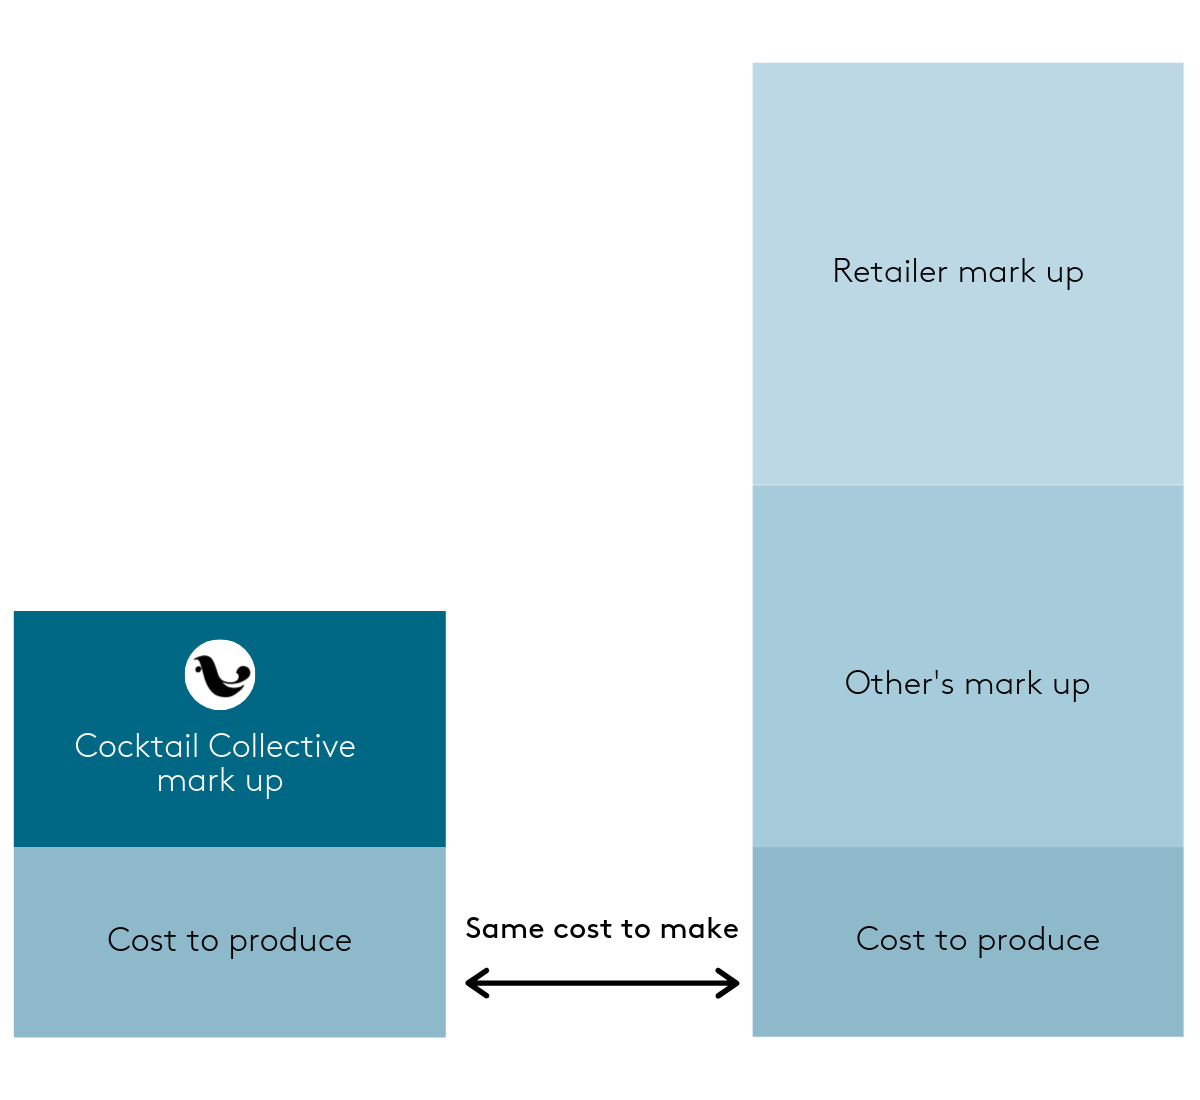 Diagram to show cost comparison between Cocktail Collective and other retailers